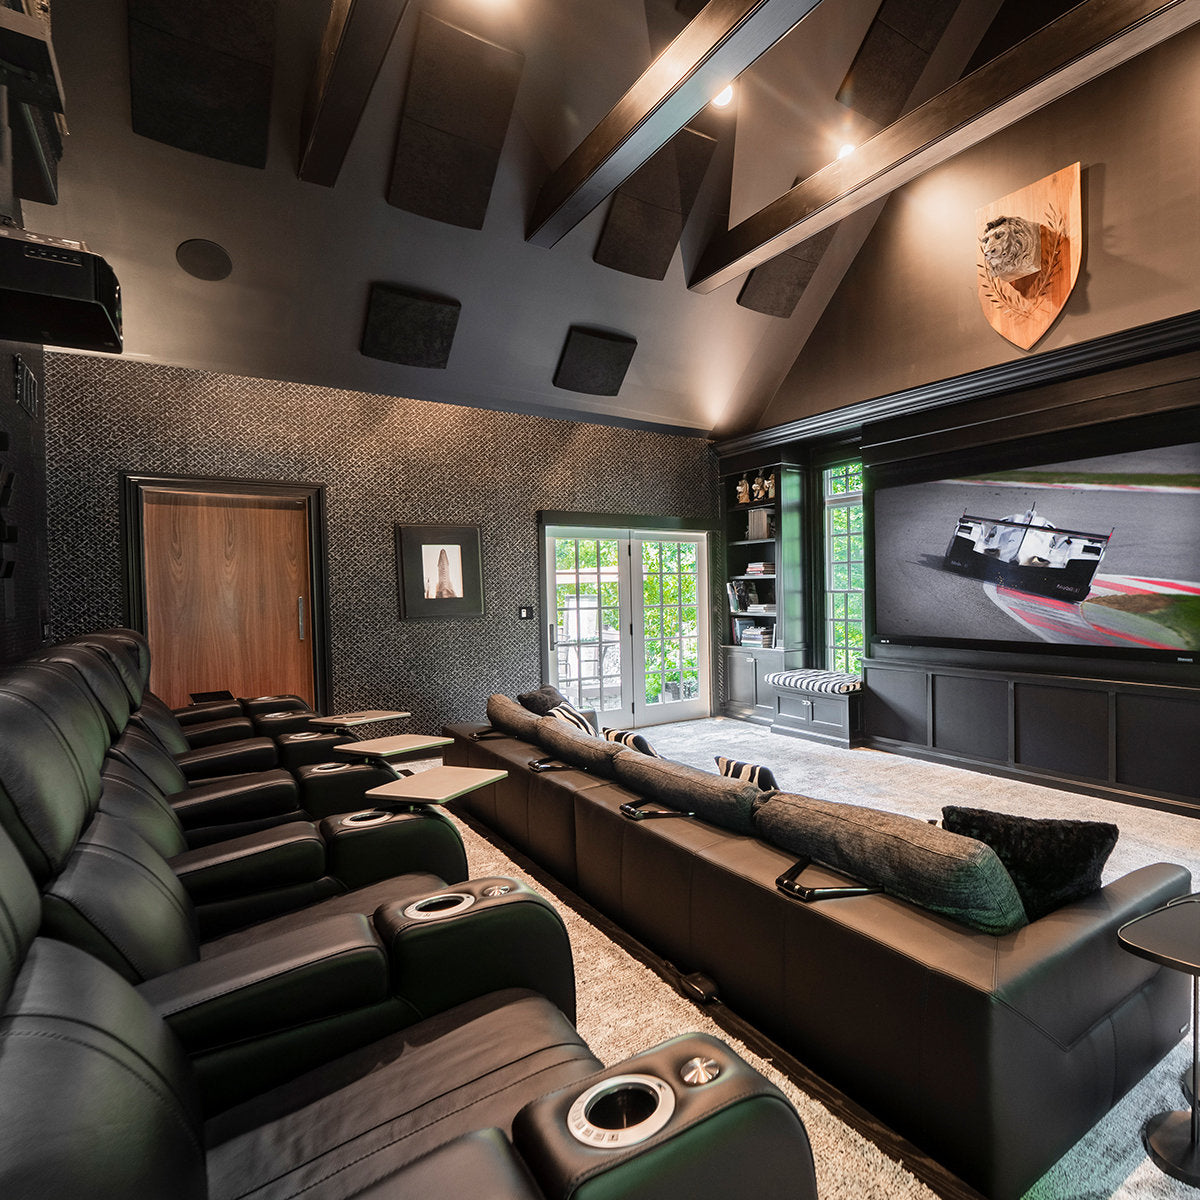 World Wide Stereo Home Theater Project